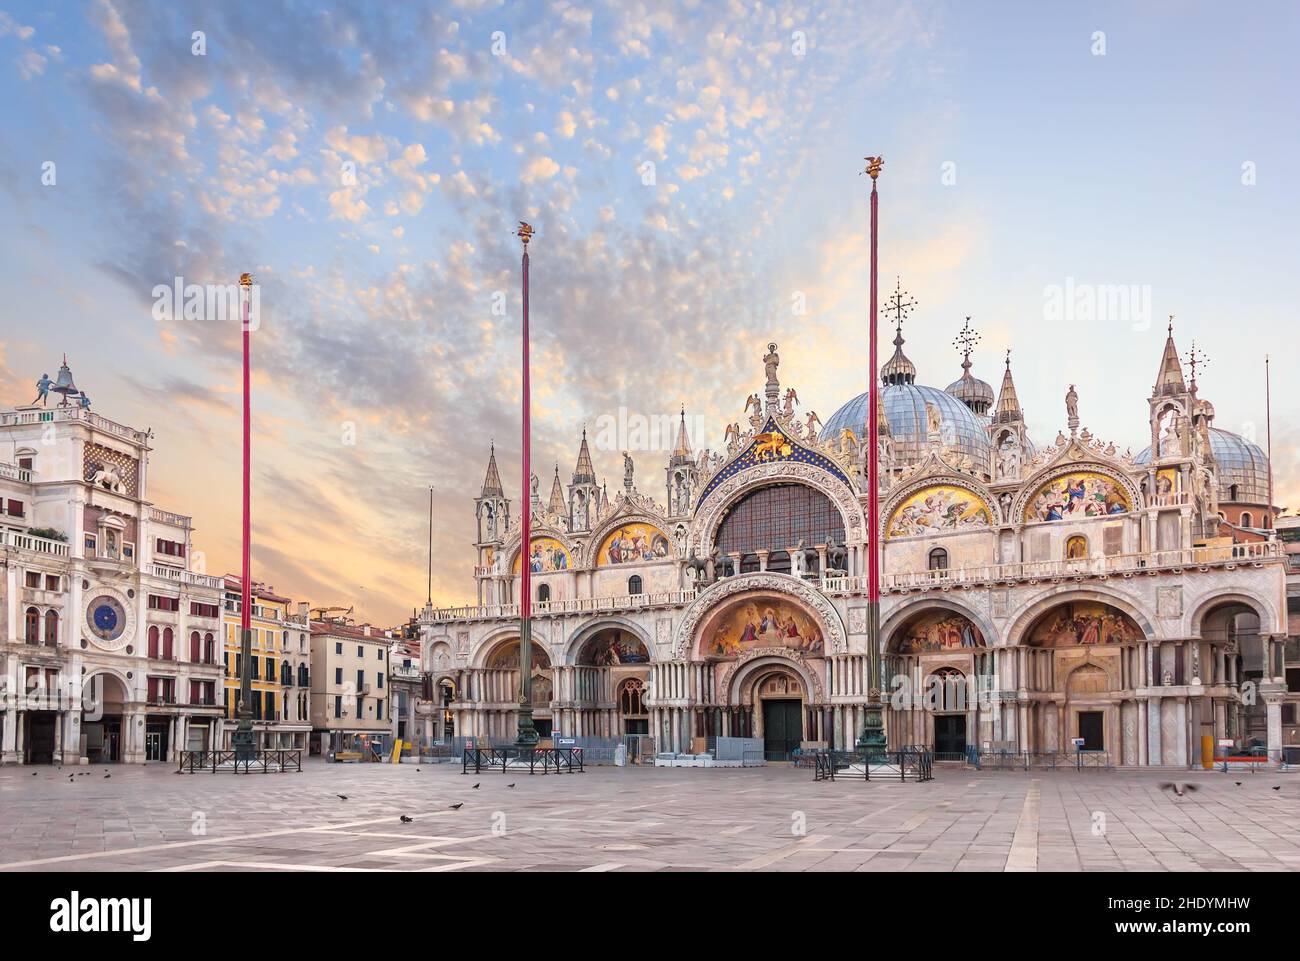 venice, st mark's cathedral, venices, st. mark's cathedrals Stock Photo